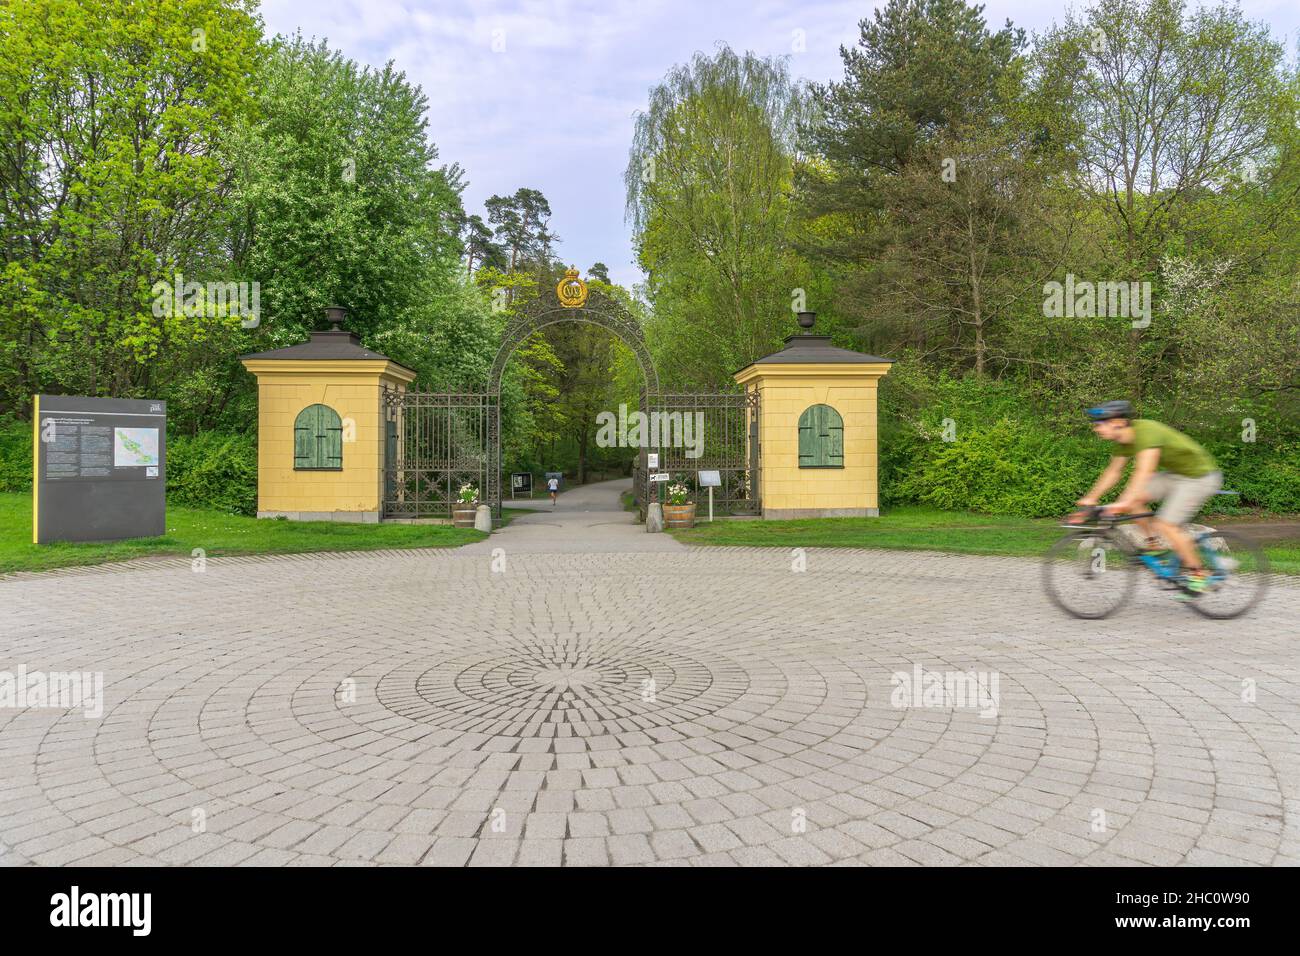 Stockholm, Sweden - May 13, 2021: Entrance to the big park in the middle of Stockholm with one blurred cyclist passing the entrance Stock Photo